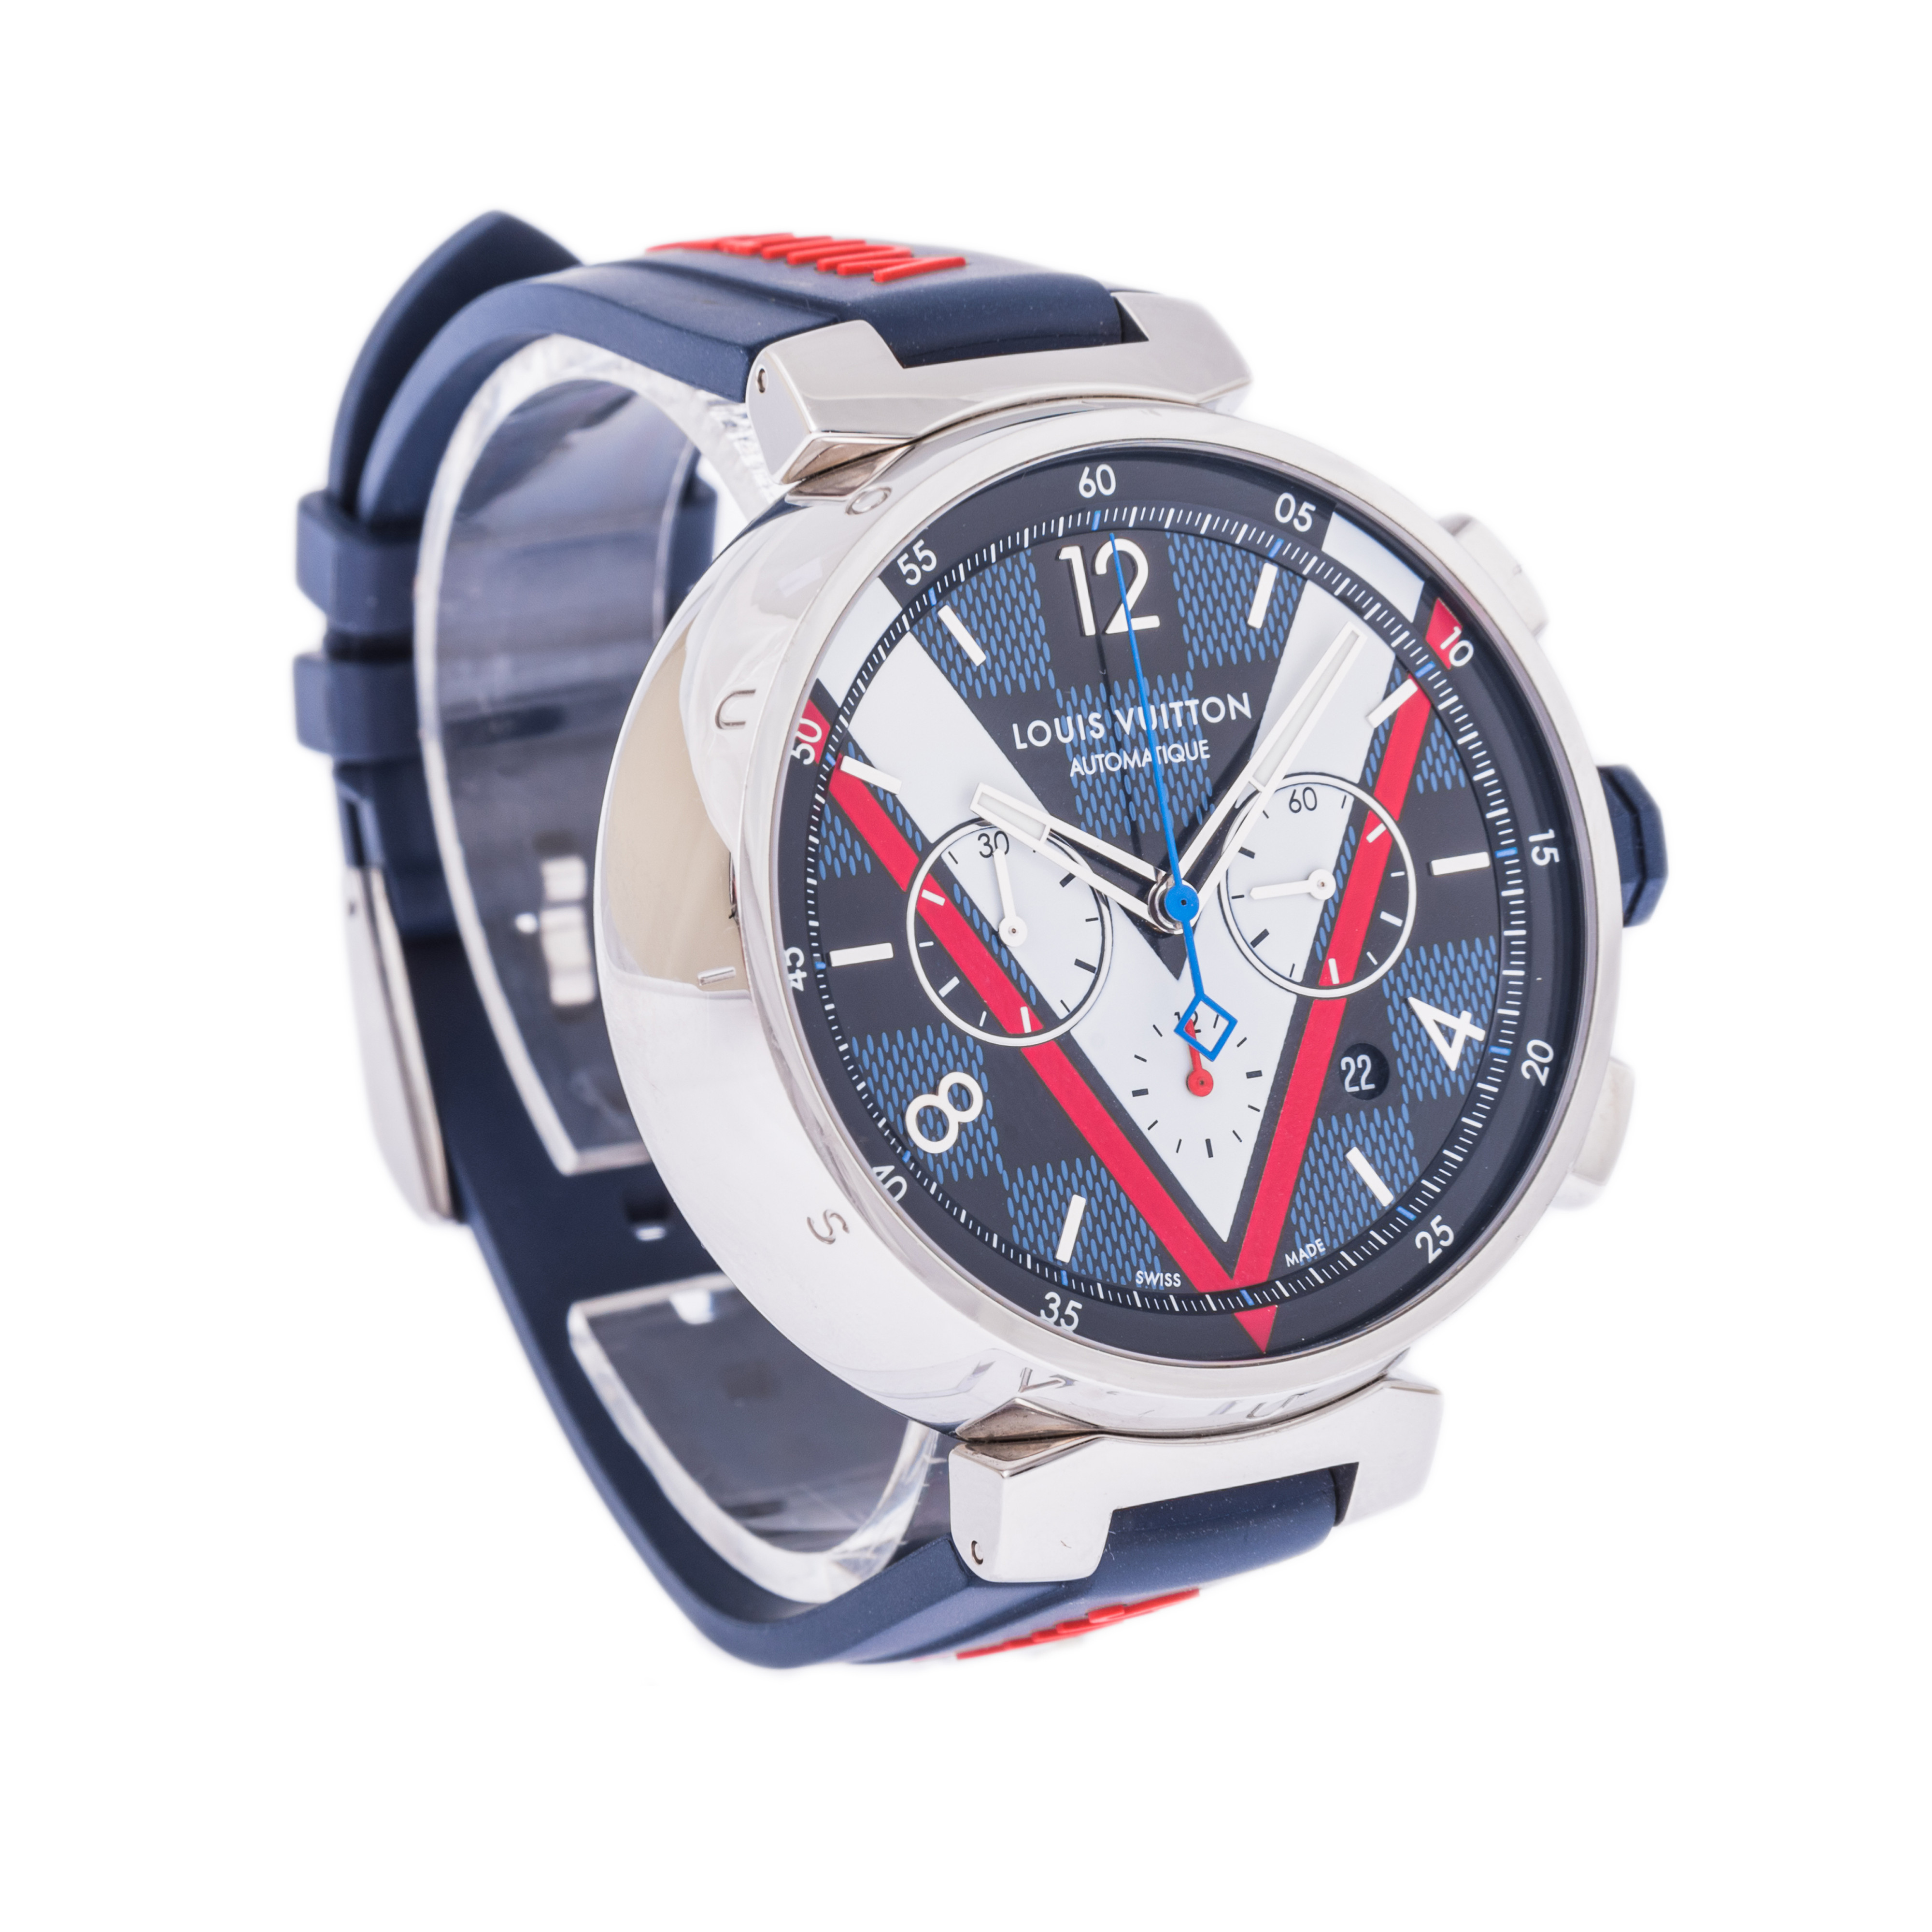 Louis Vuitton Tambour second hand prices